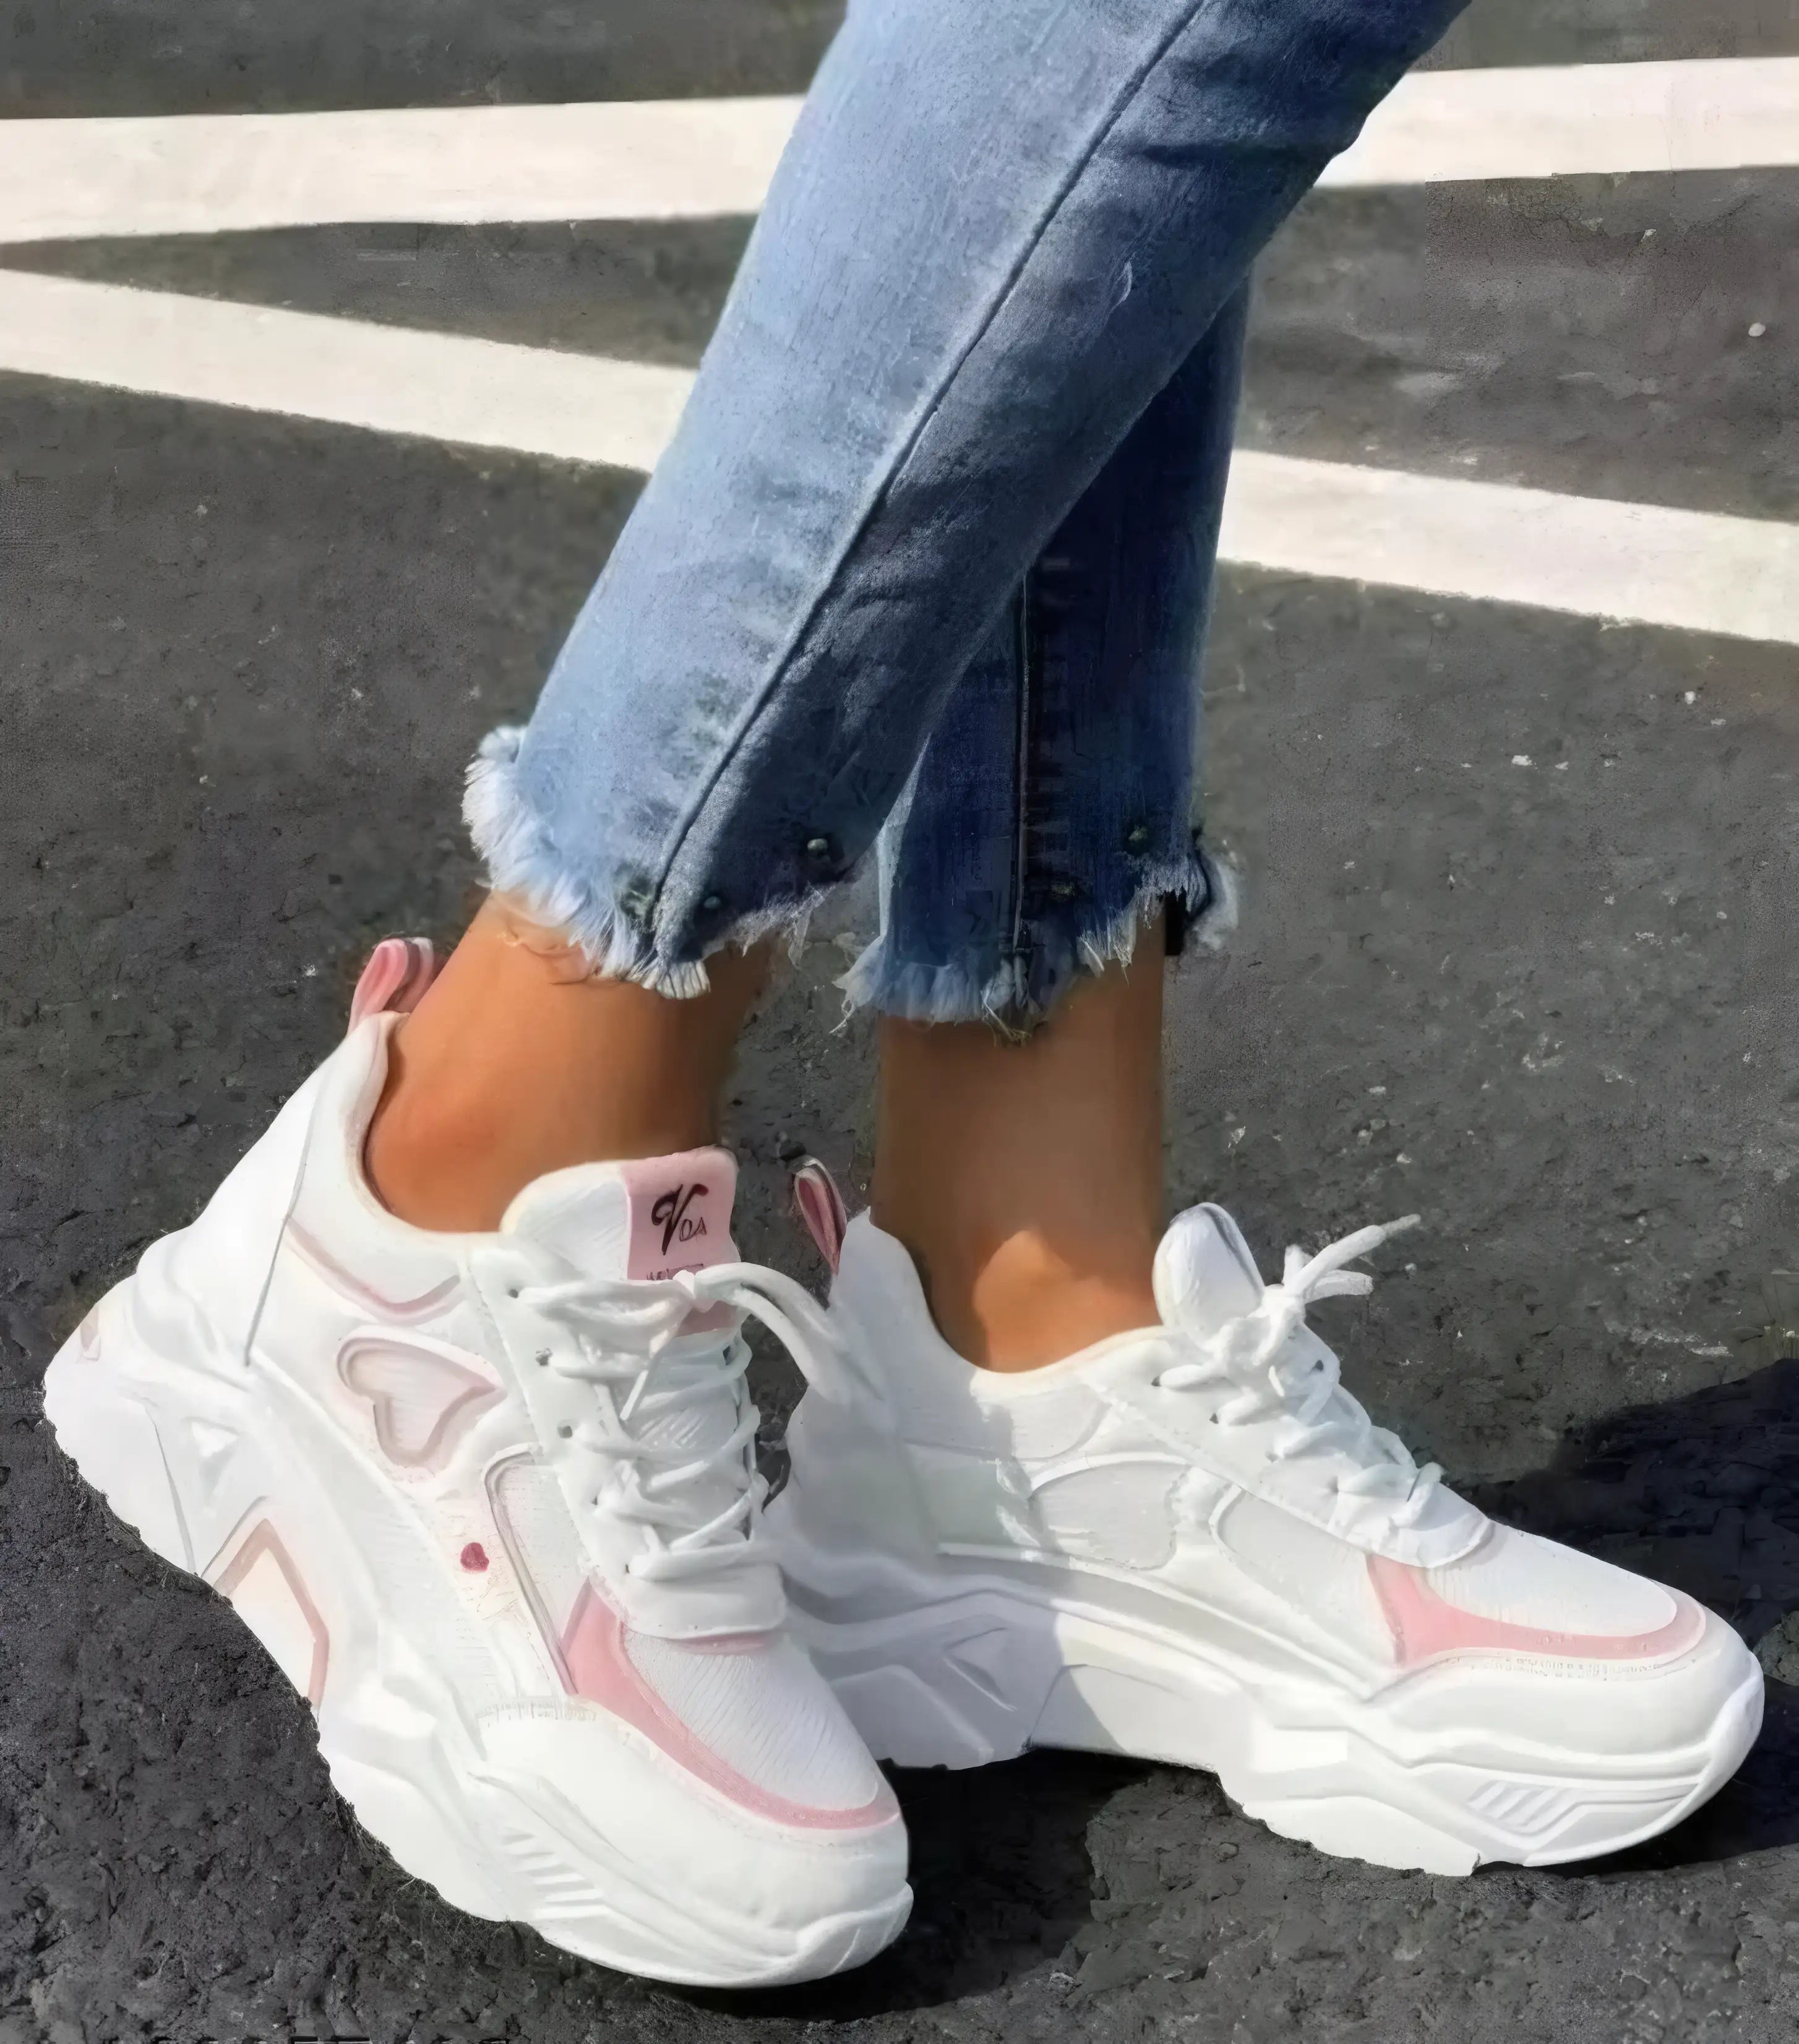 Women's White-Pink Synthetic Leather Sneakers Shoes